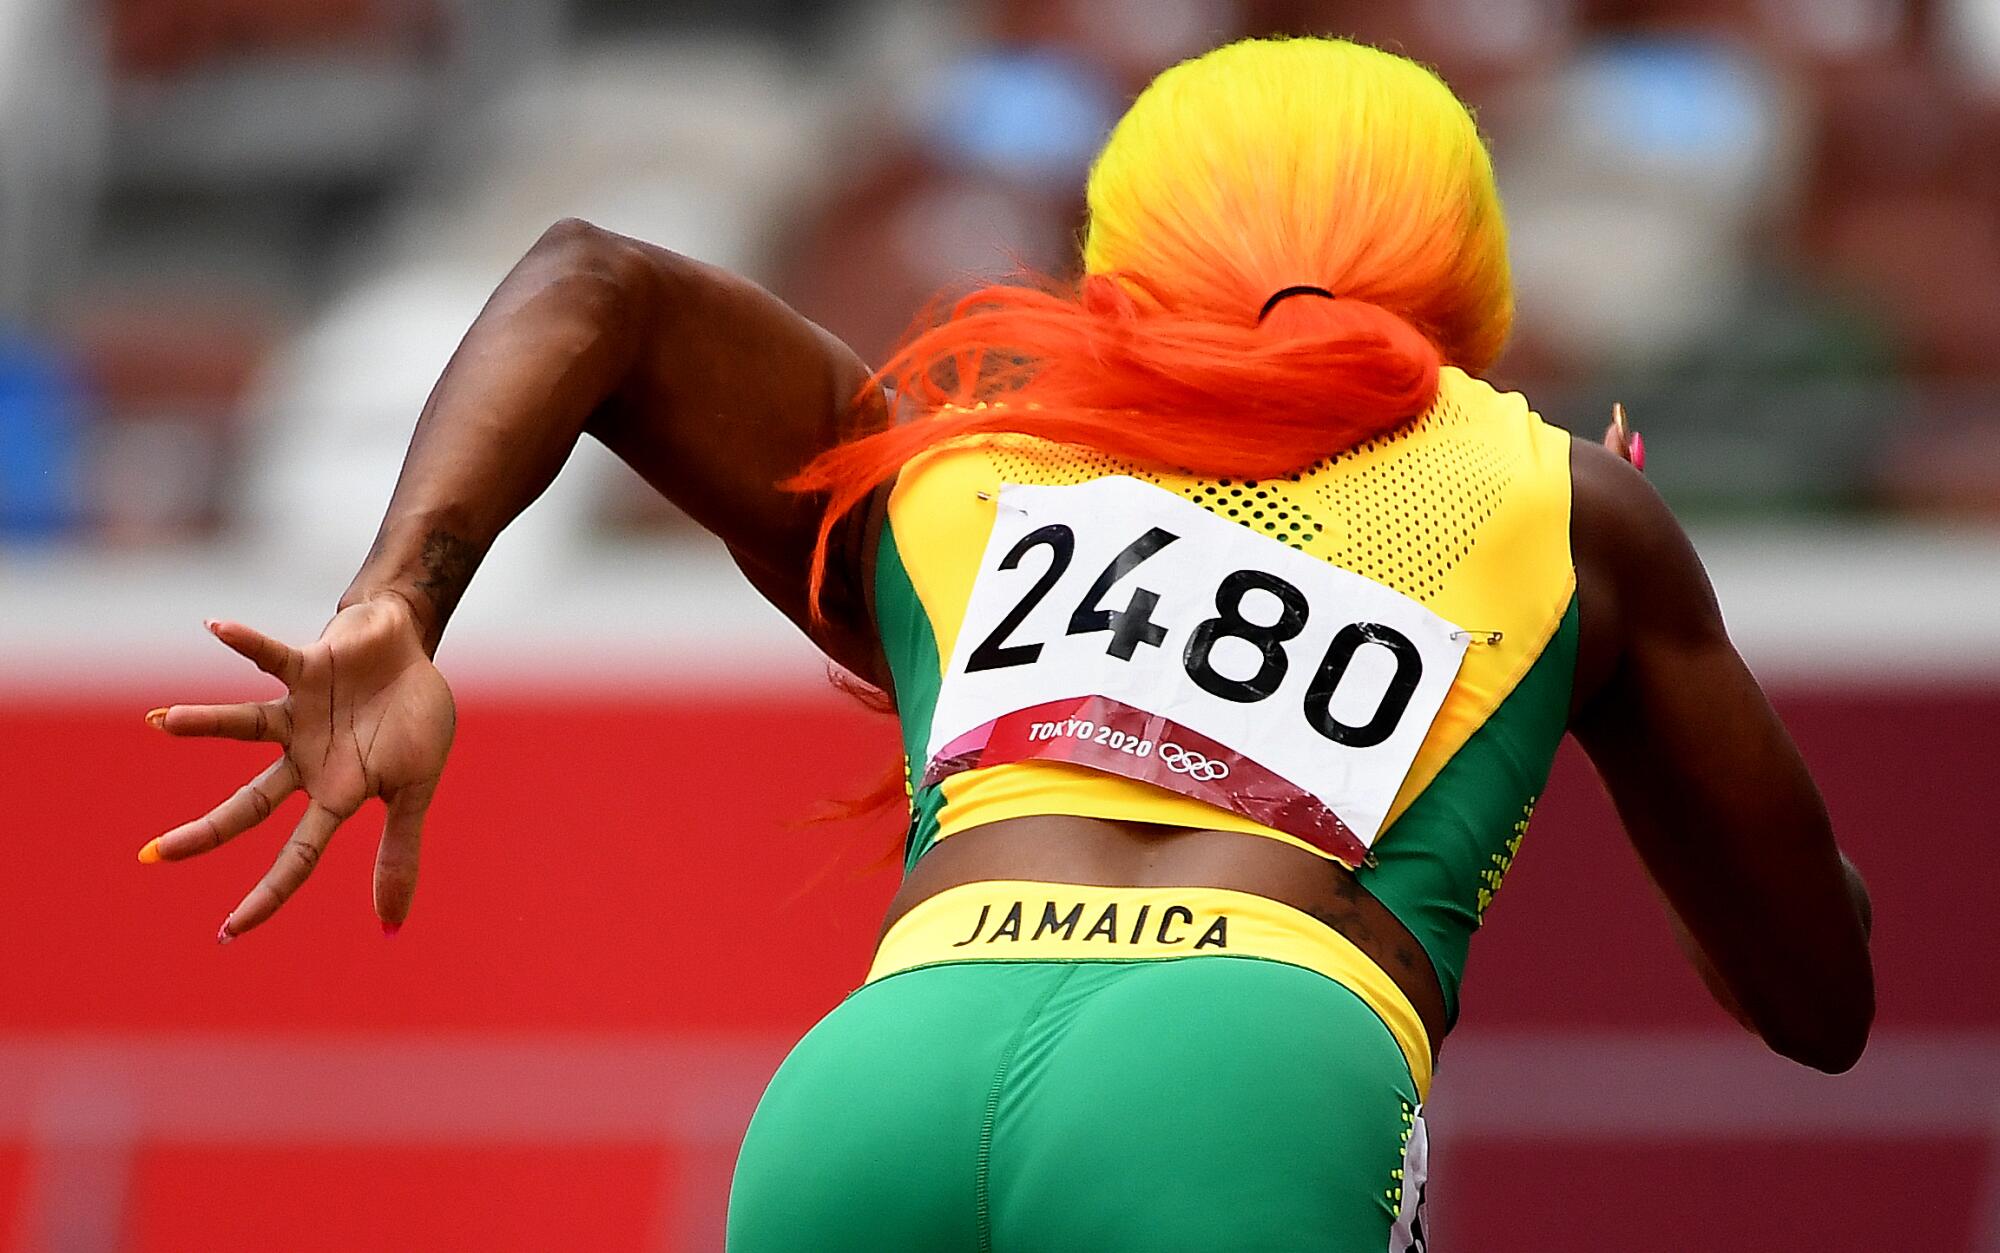 Jamaica's Shelly-Ann Fraser-Pryce takes off from the starting blocks in round 1 of the 200m race.